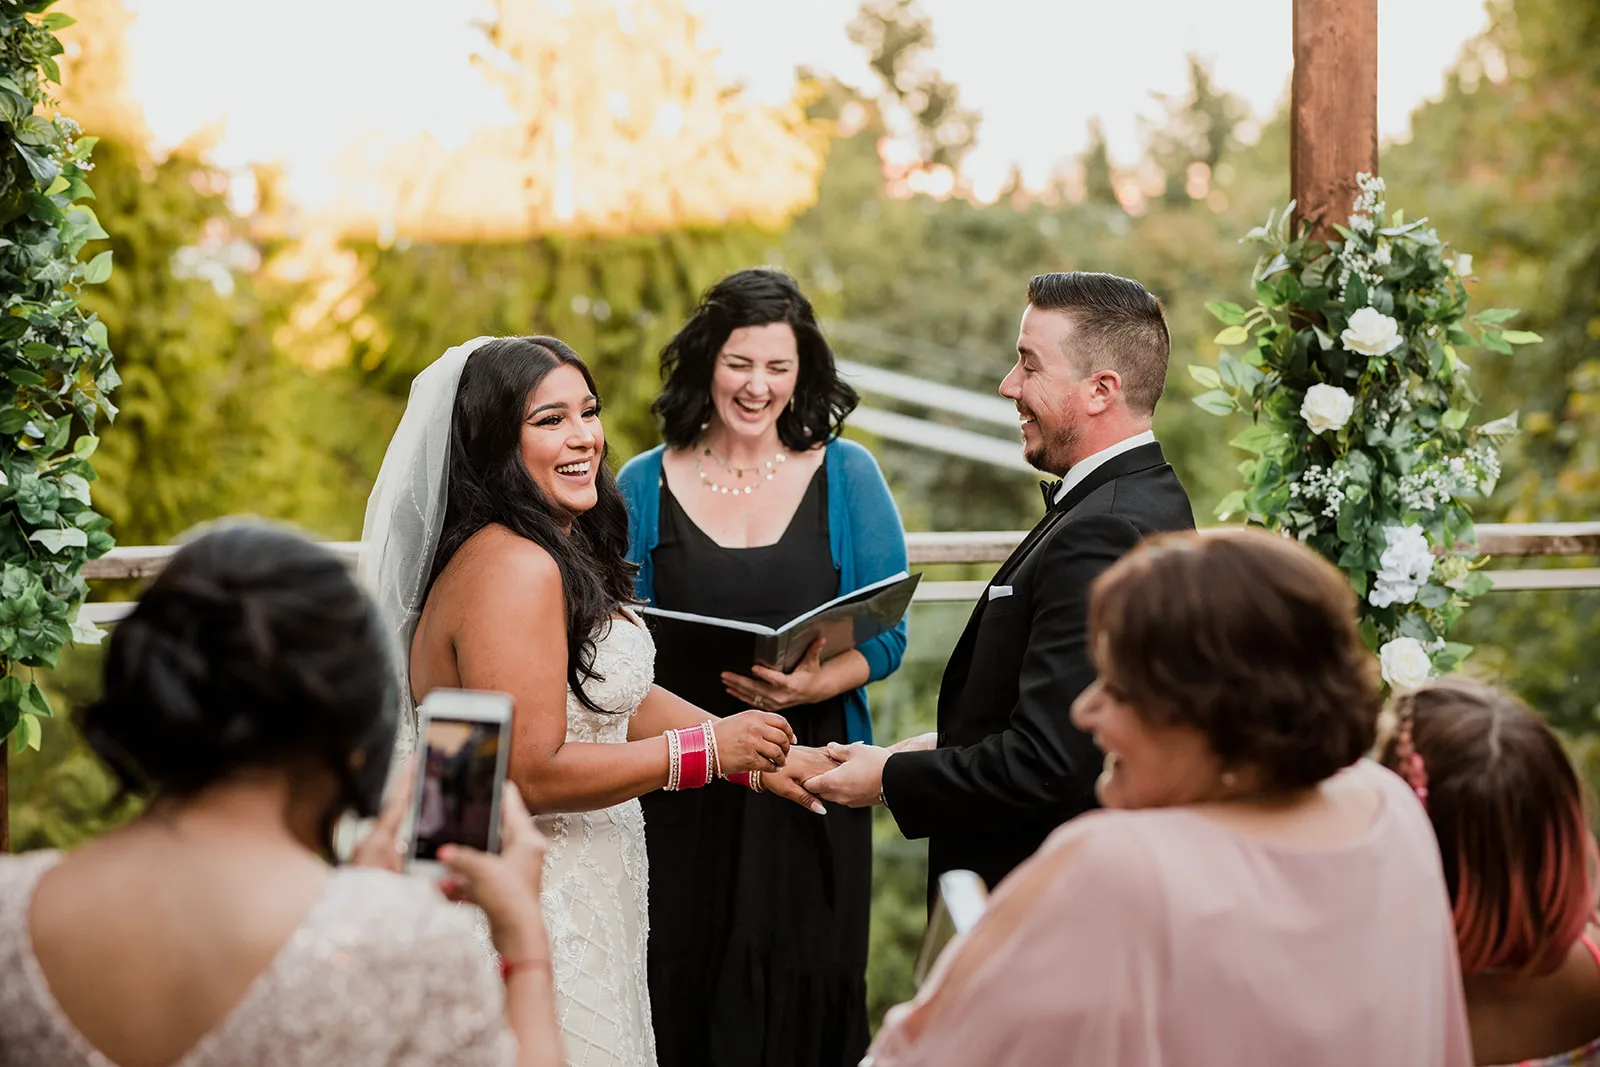 Wedding officiant Erika Enns with Young Hip & Married